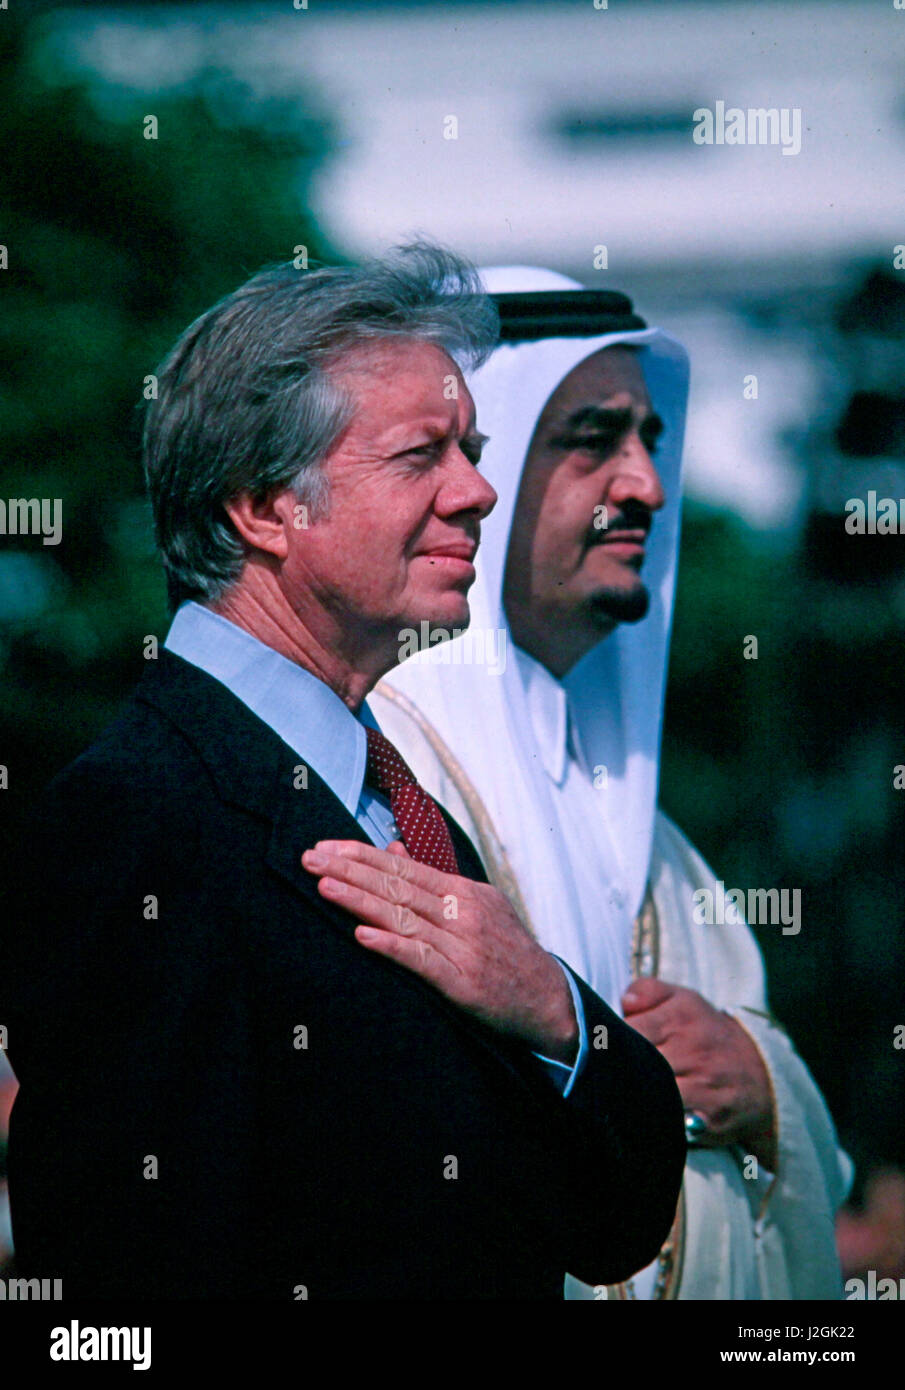 President Jimmy Carter and Carter and Fahd bin Abdulaziz Al Saud during an arrival ceremony on the South Lawn of the White House on May 24, 1977 (Large format sizes available) Stock Photo